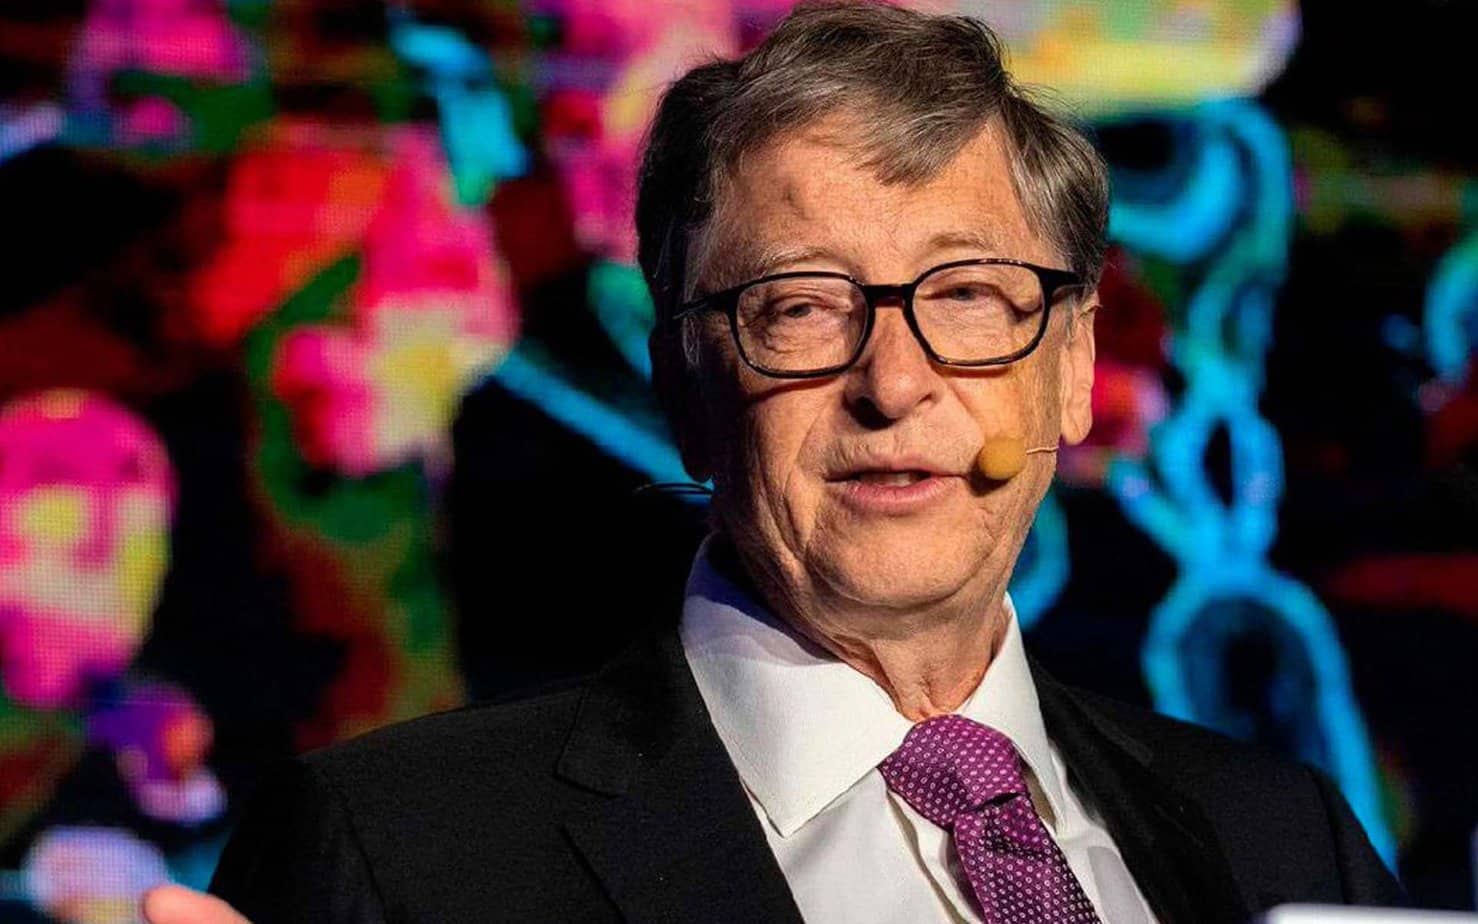 COVID-19 Vaccine Enters Human Testing, Funded by Bill Gates